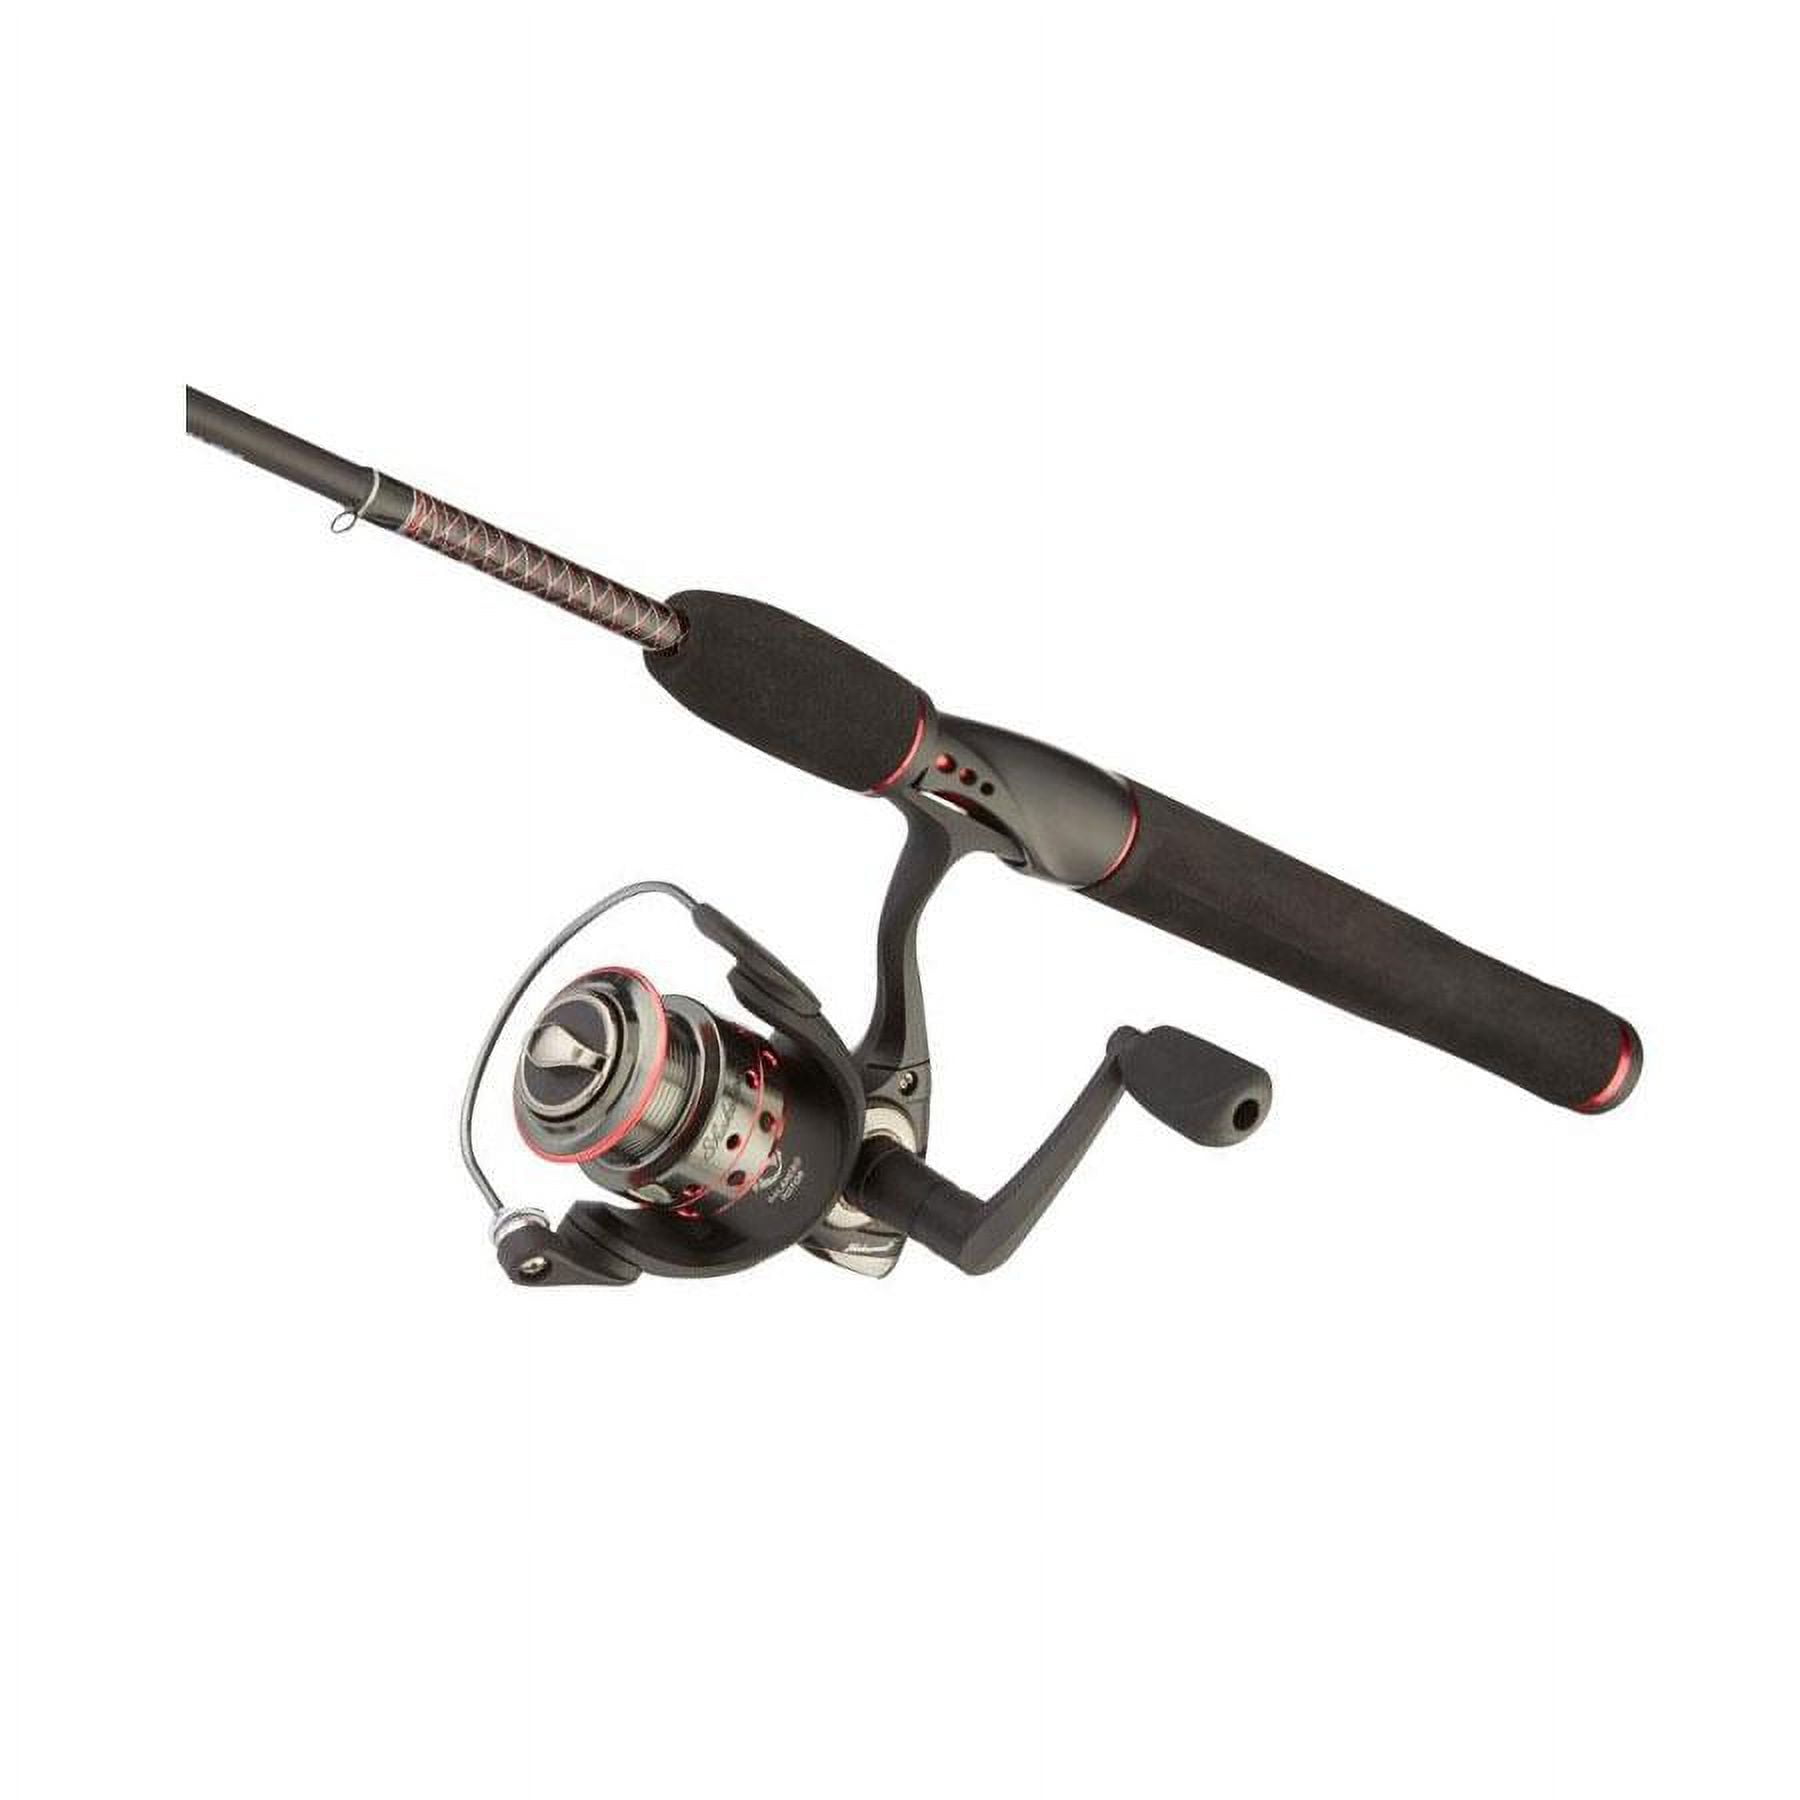 Ugly Stik 6'6” GX2 Spinning Fishing Rod and Reel Spinning Combo